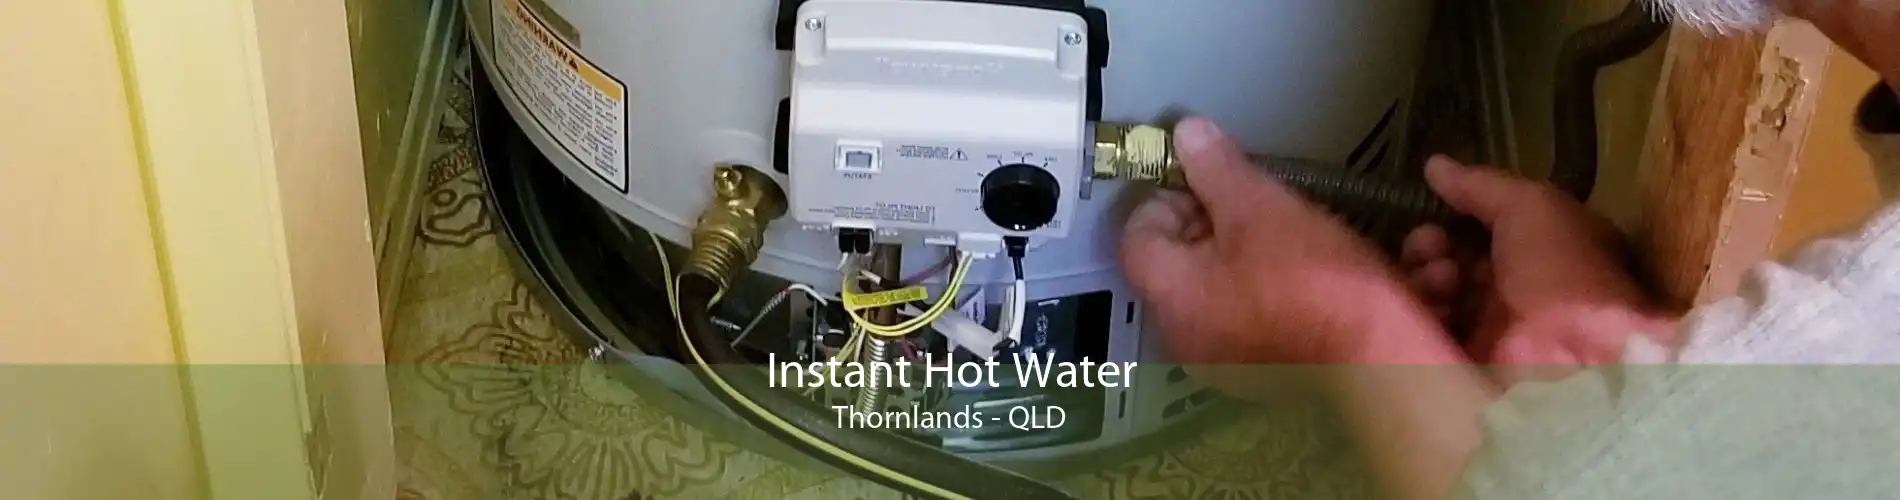 Instant Hot Water Thornlands - QLD